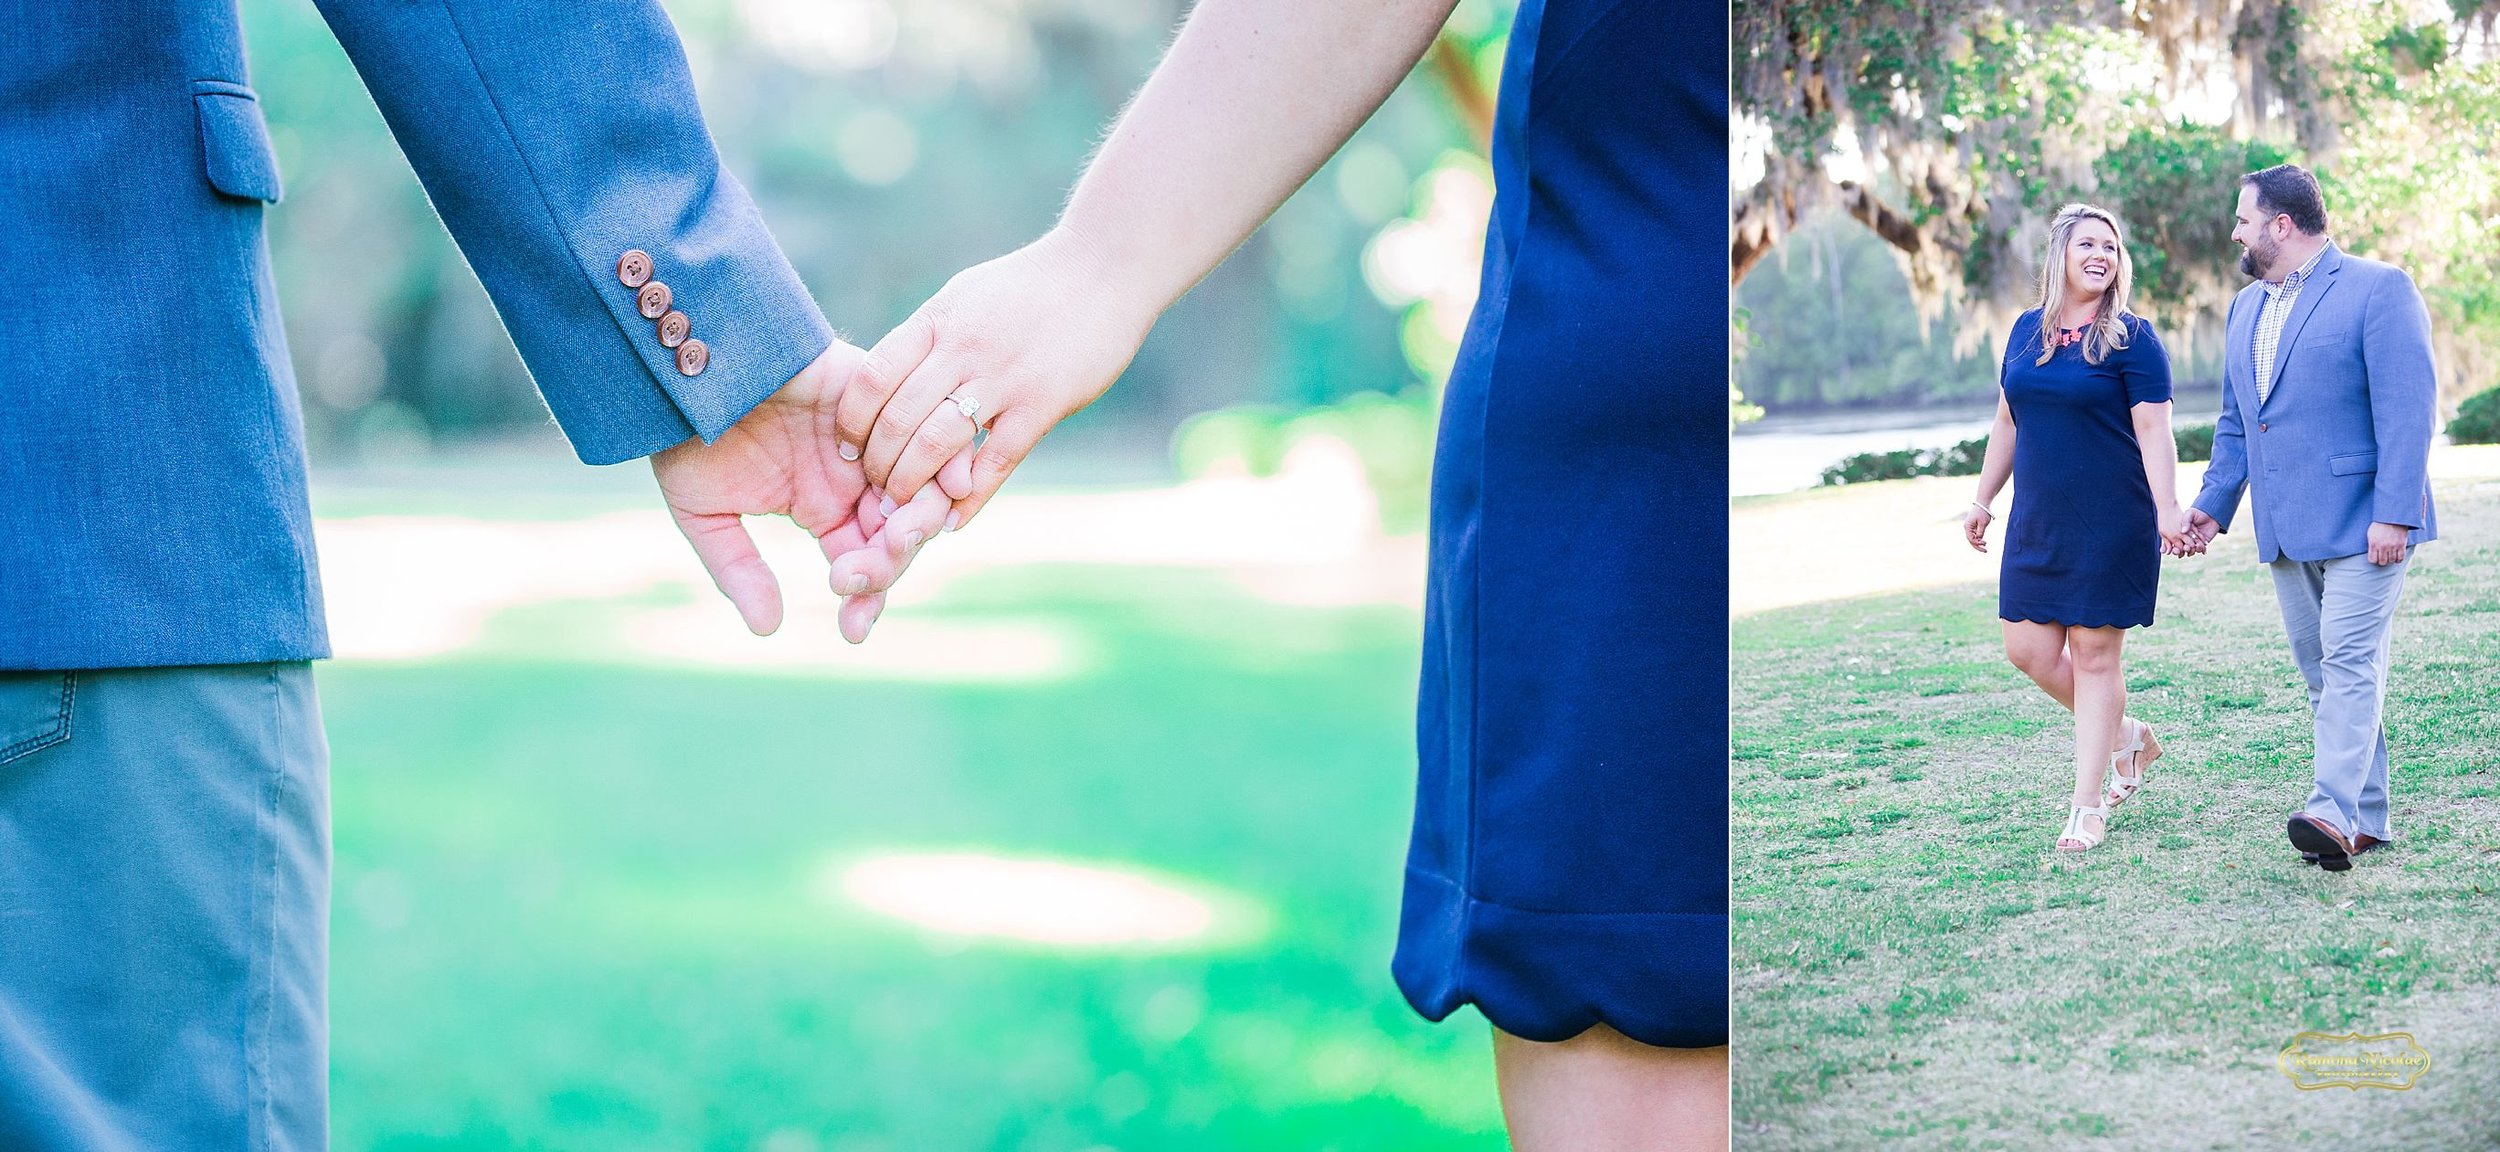 holding hands walking and laughing for ramona nicolae photography engagement session at wachesaw plantation.jpg